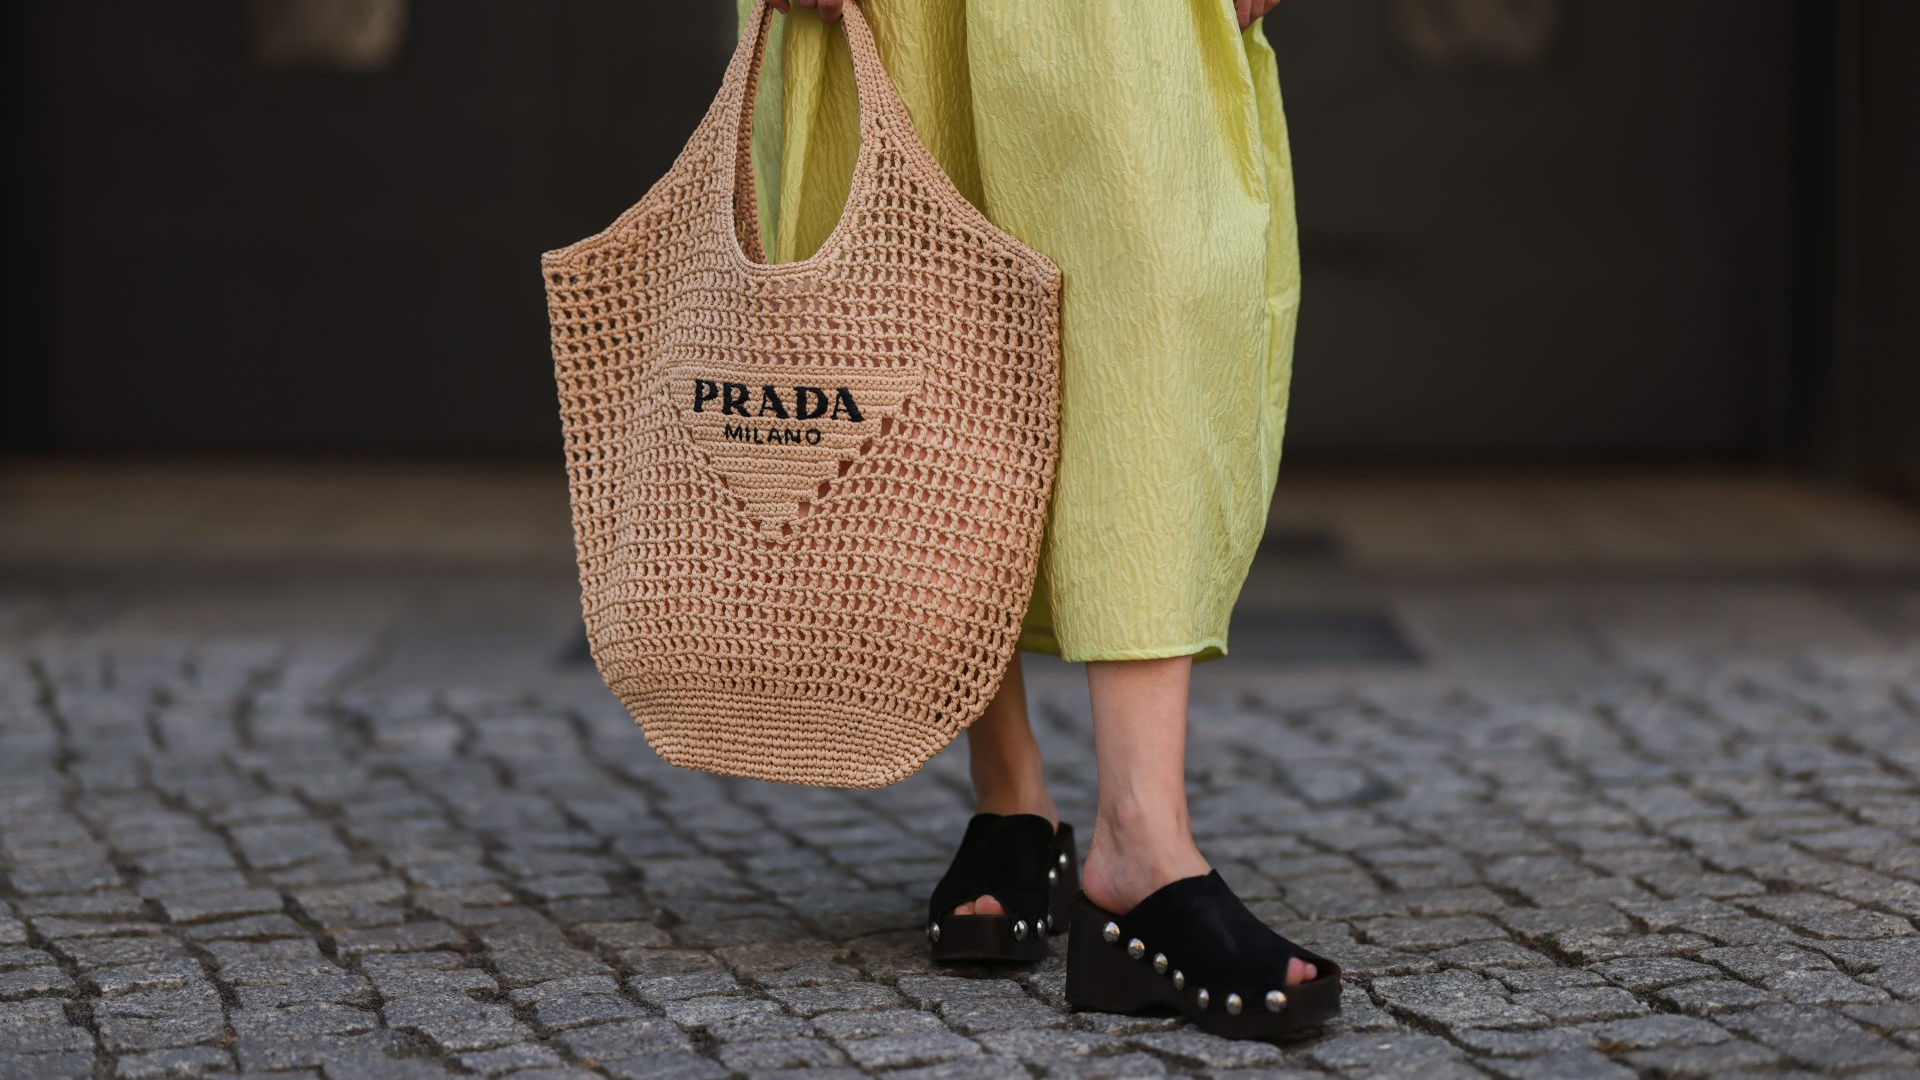 Wooden clogs are making a comeback: How to wear them